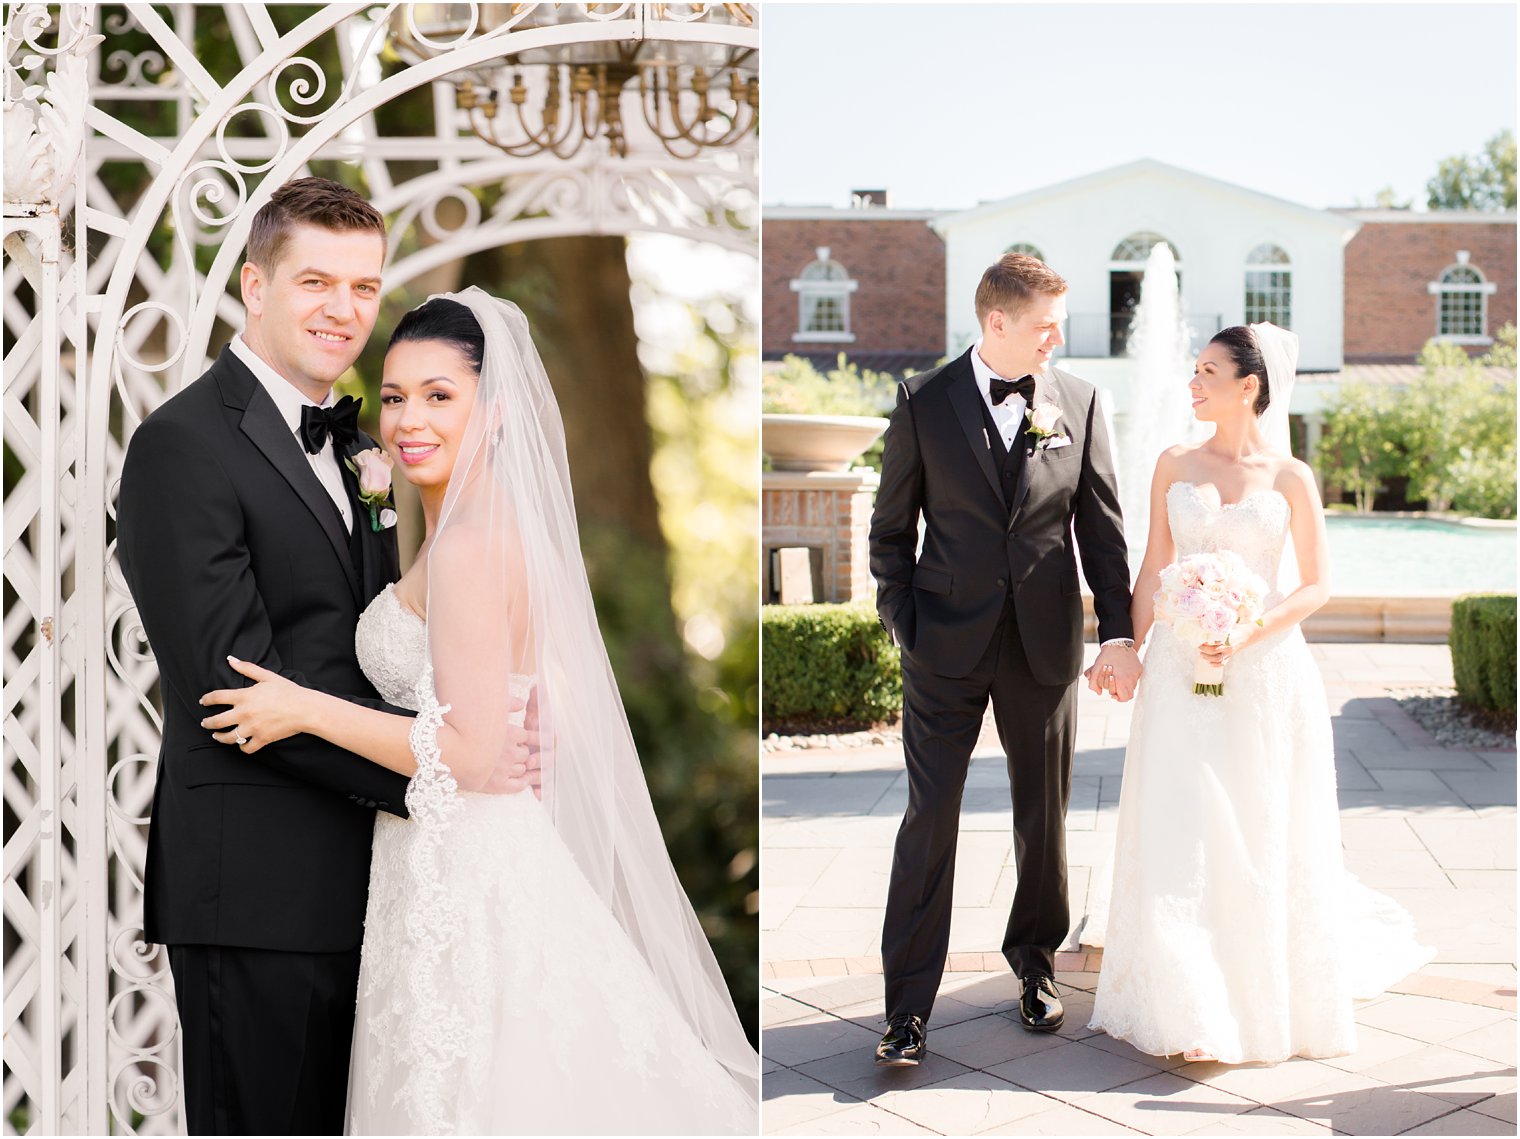 smiling bride and groom photo at Rockleigh Country Club